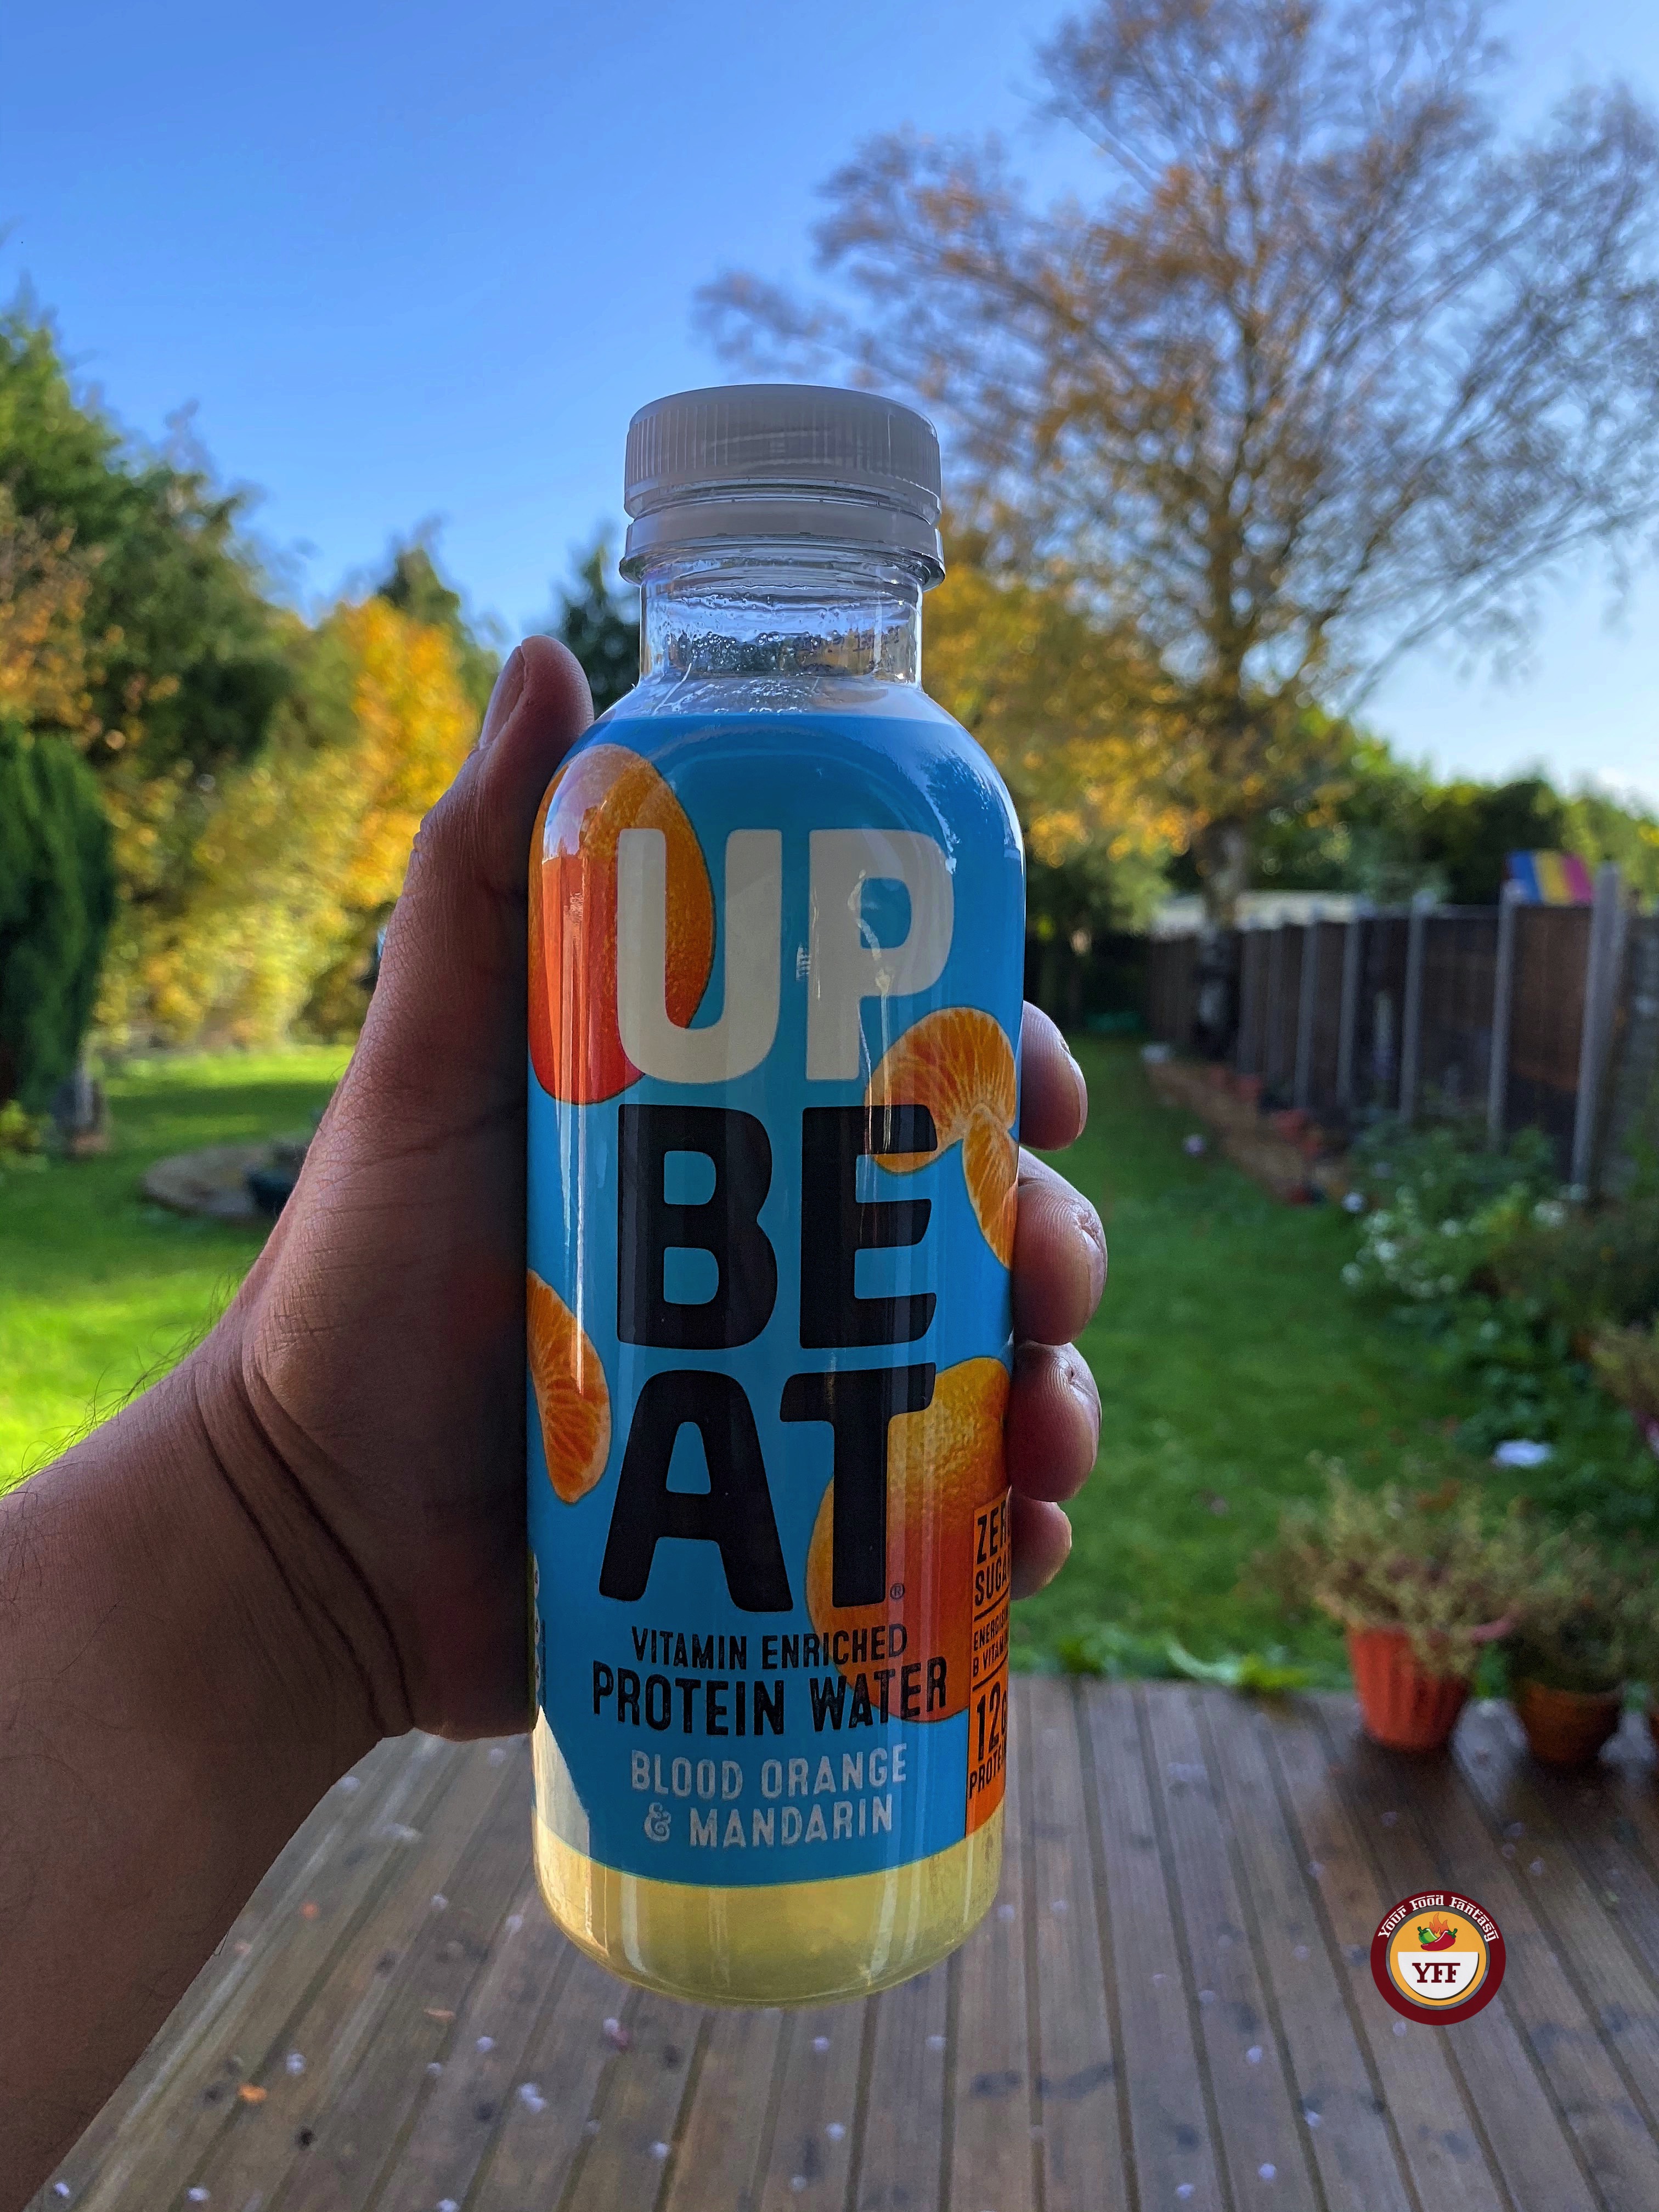 Upbeat Juicy Protein Water | Review by Your Food Fantasy